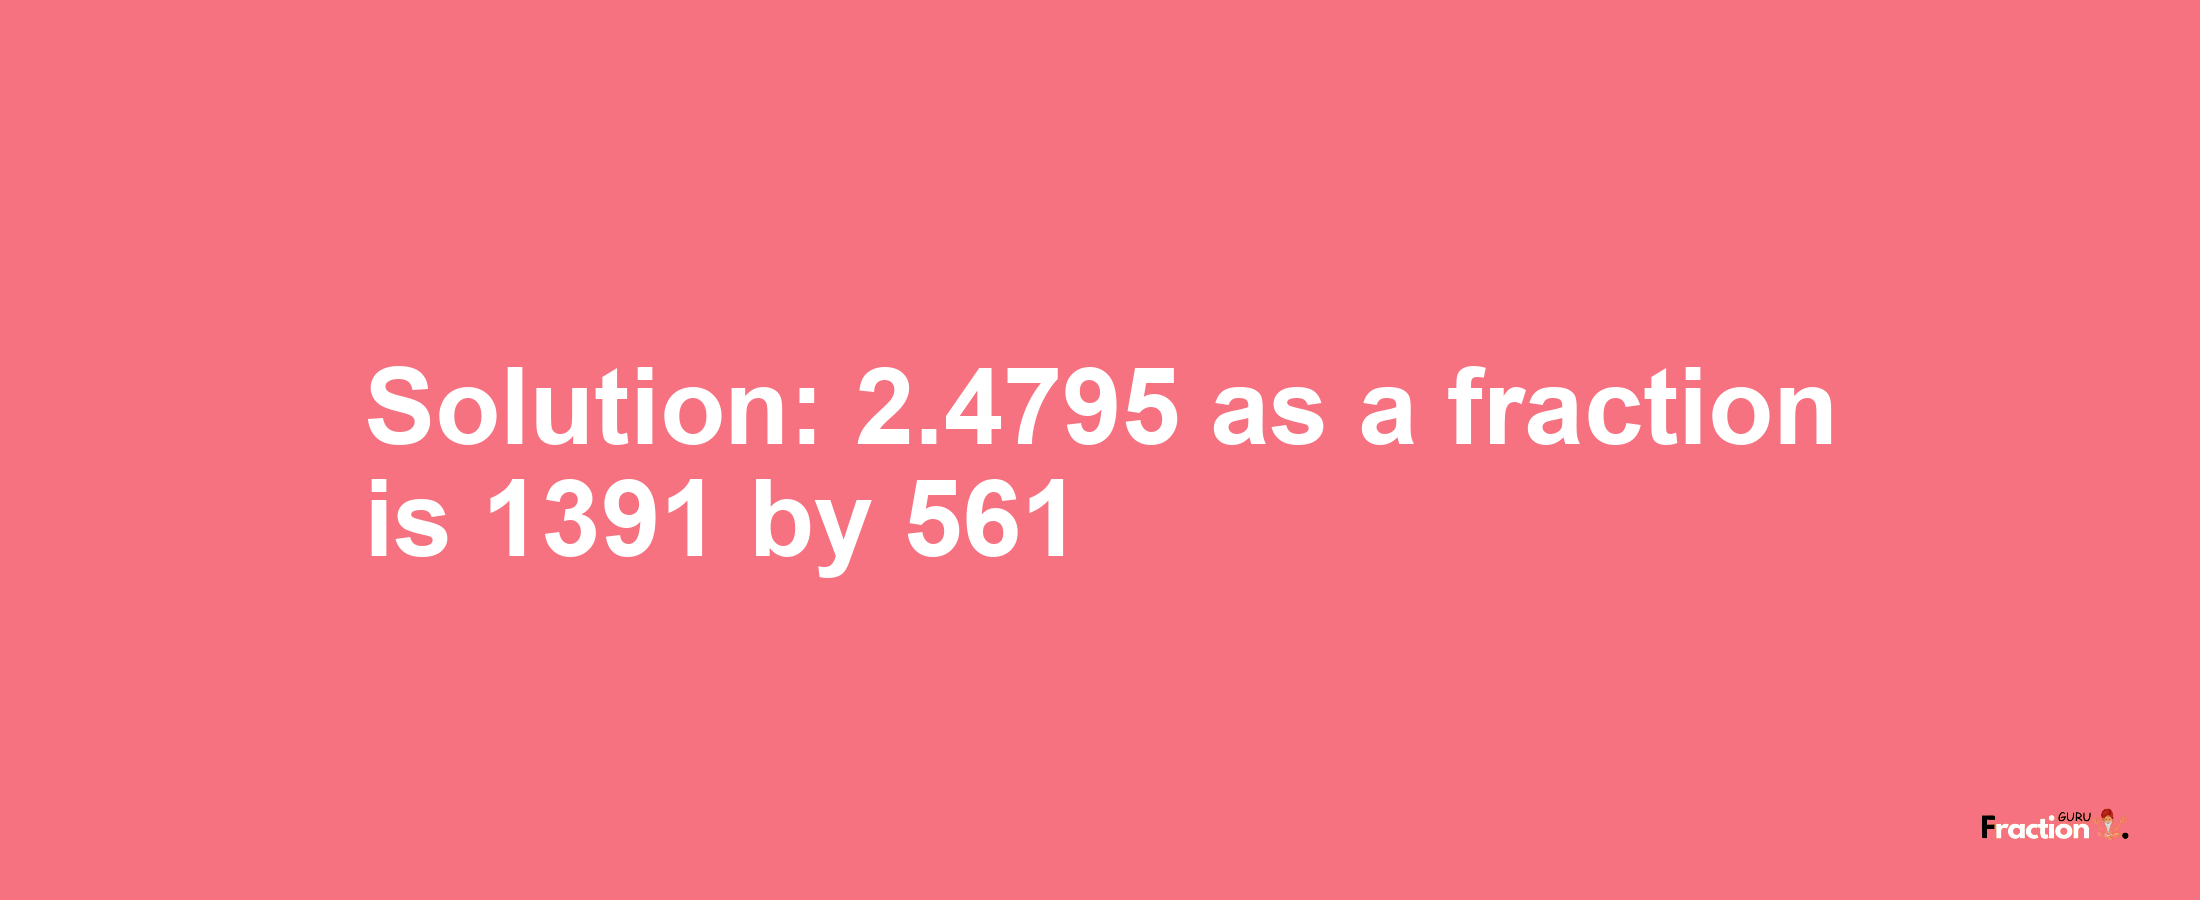 Solution:2.4795 as a fraction is 1391/561